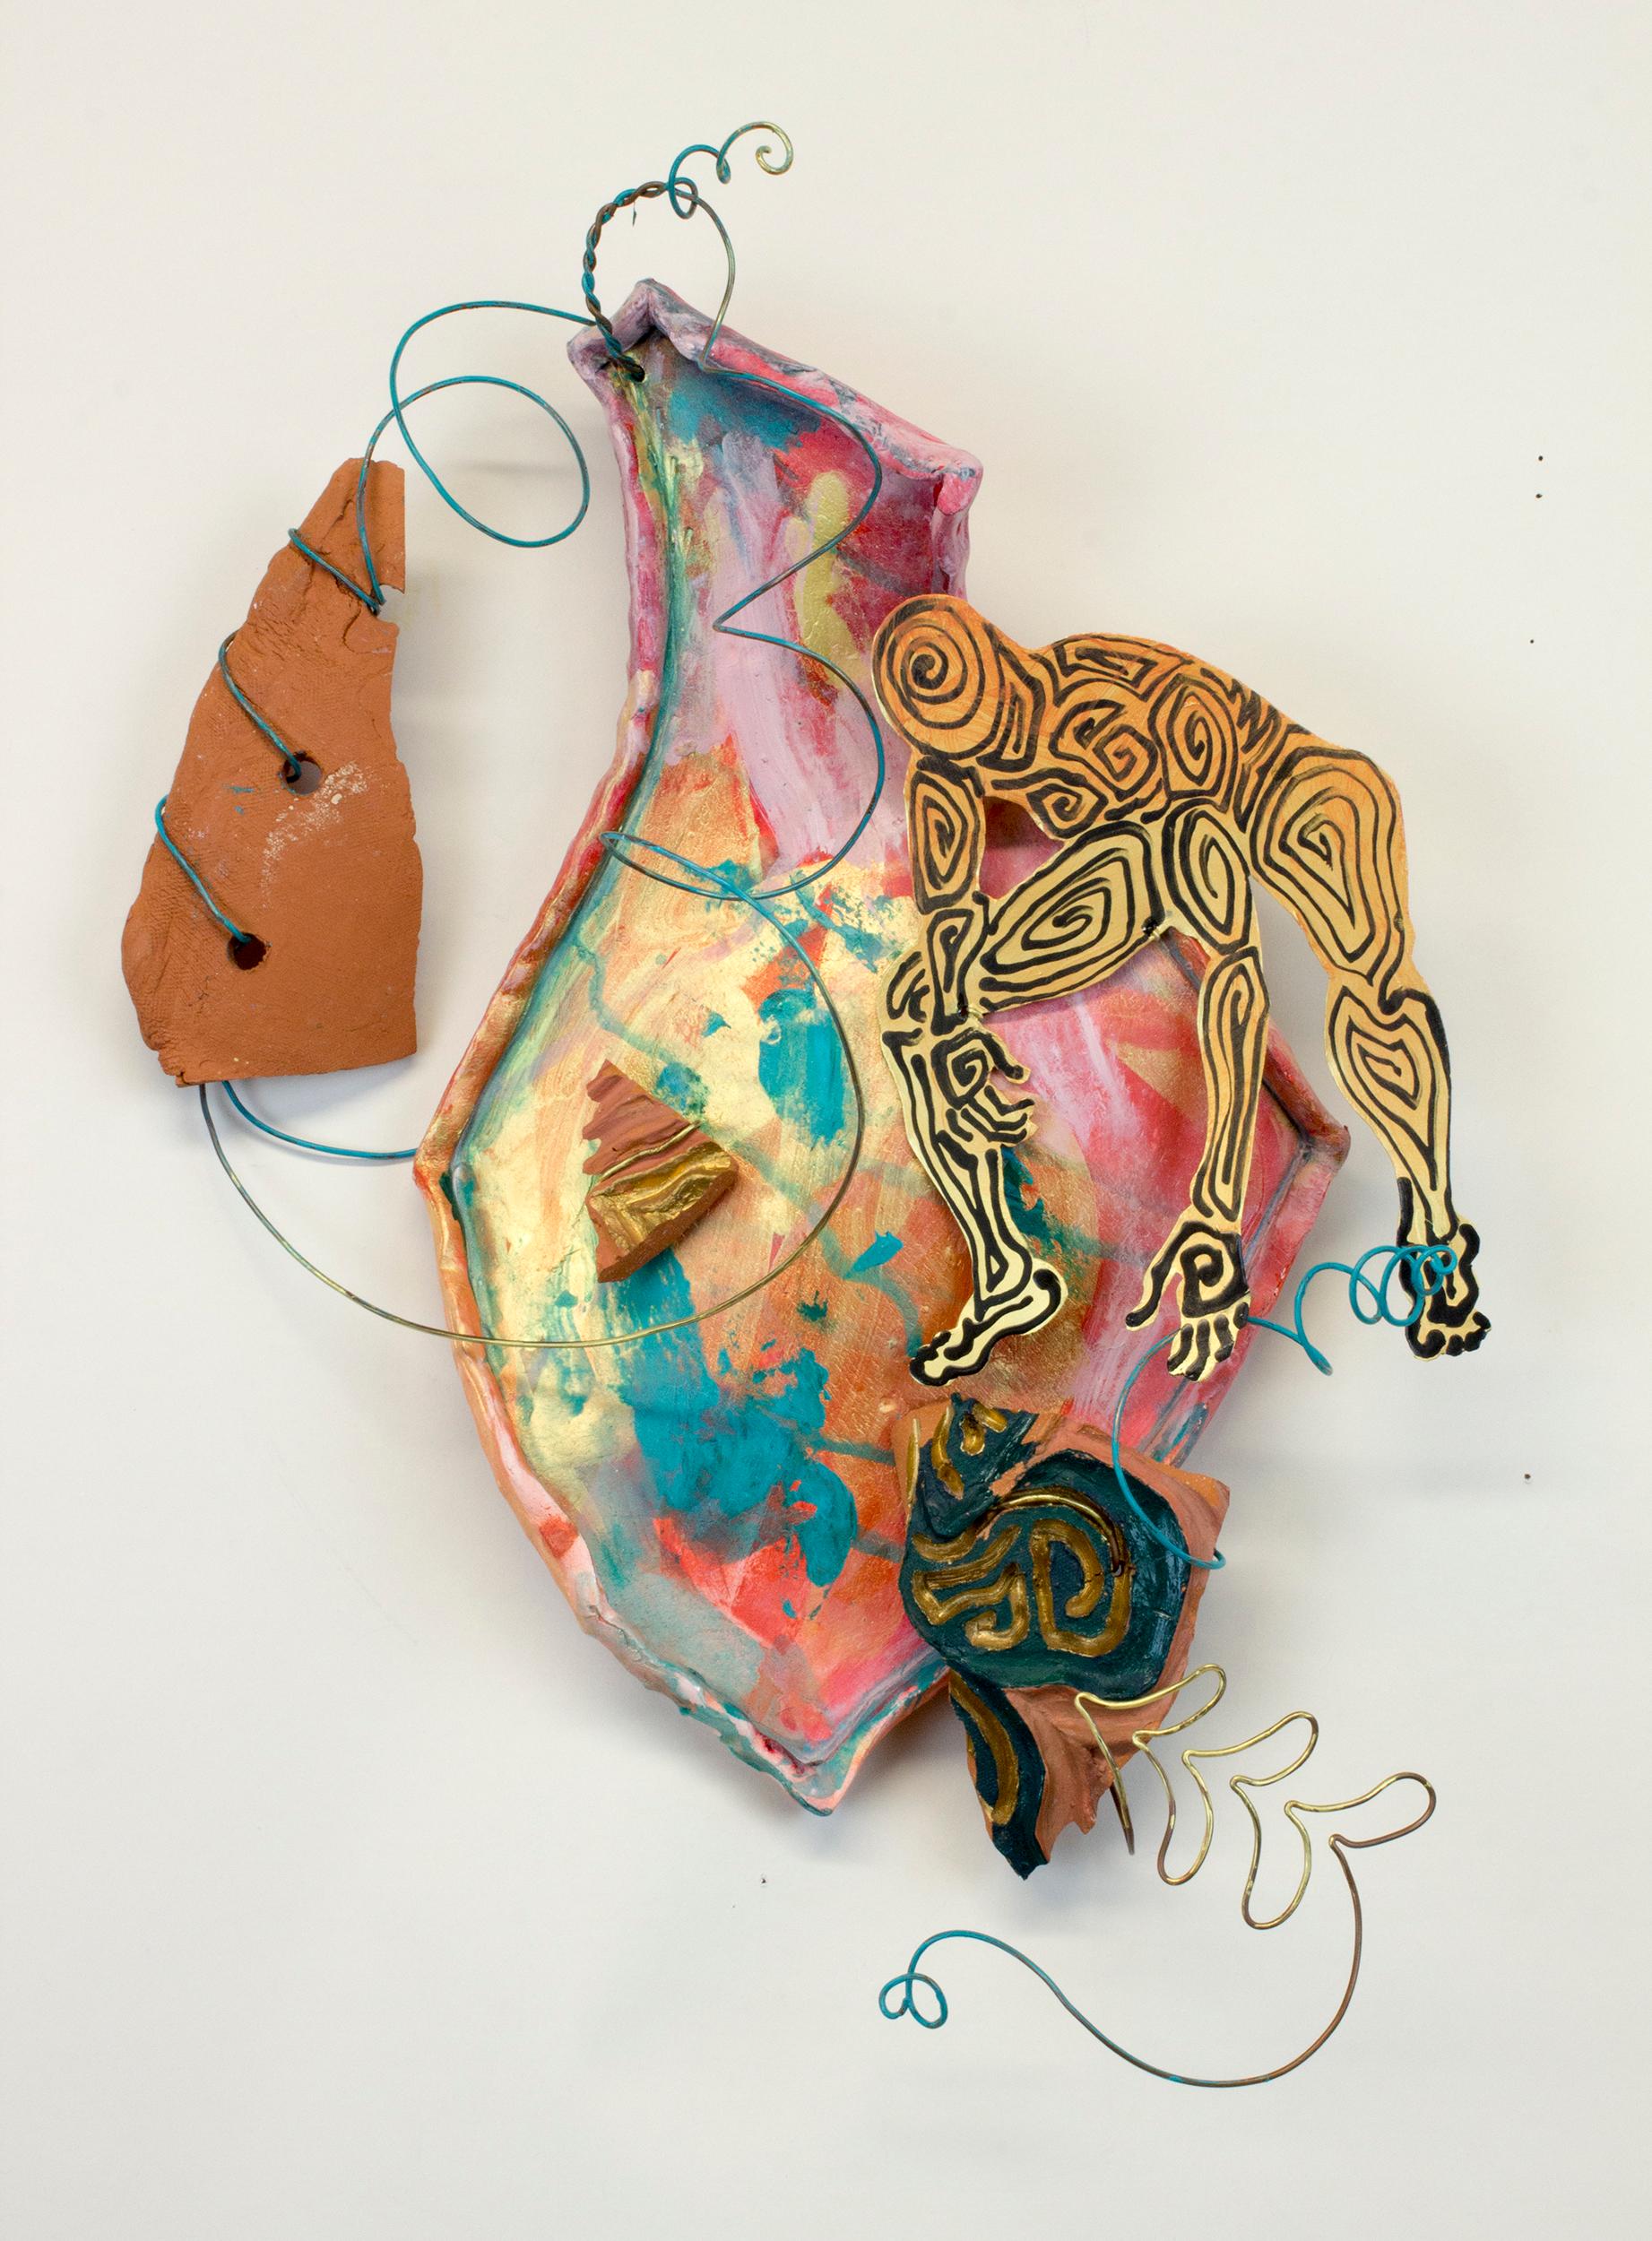 "Illogical Sequence", contemporary, pink, gold, green, teal, metal, sculpture - Mixed Media Art by Virginia Mahoney